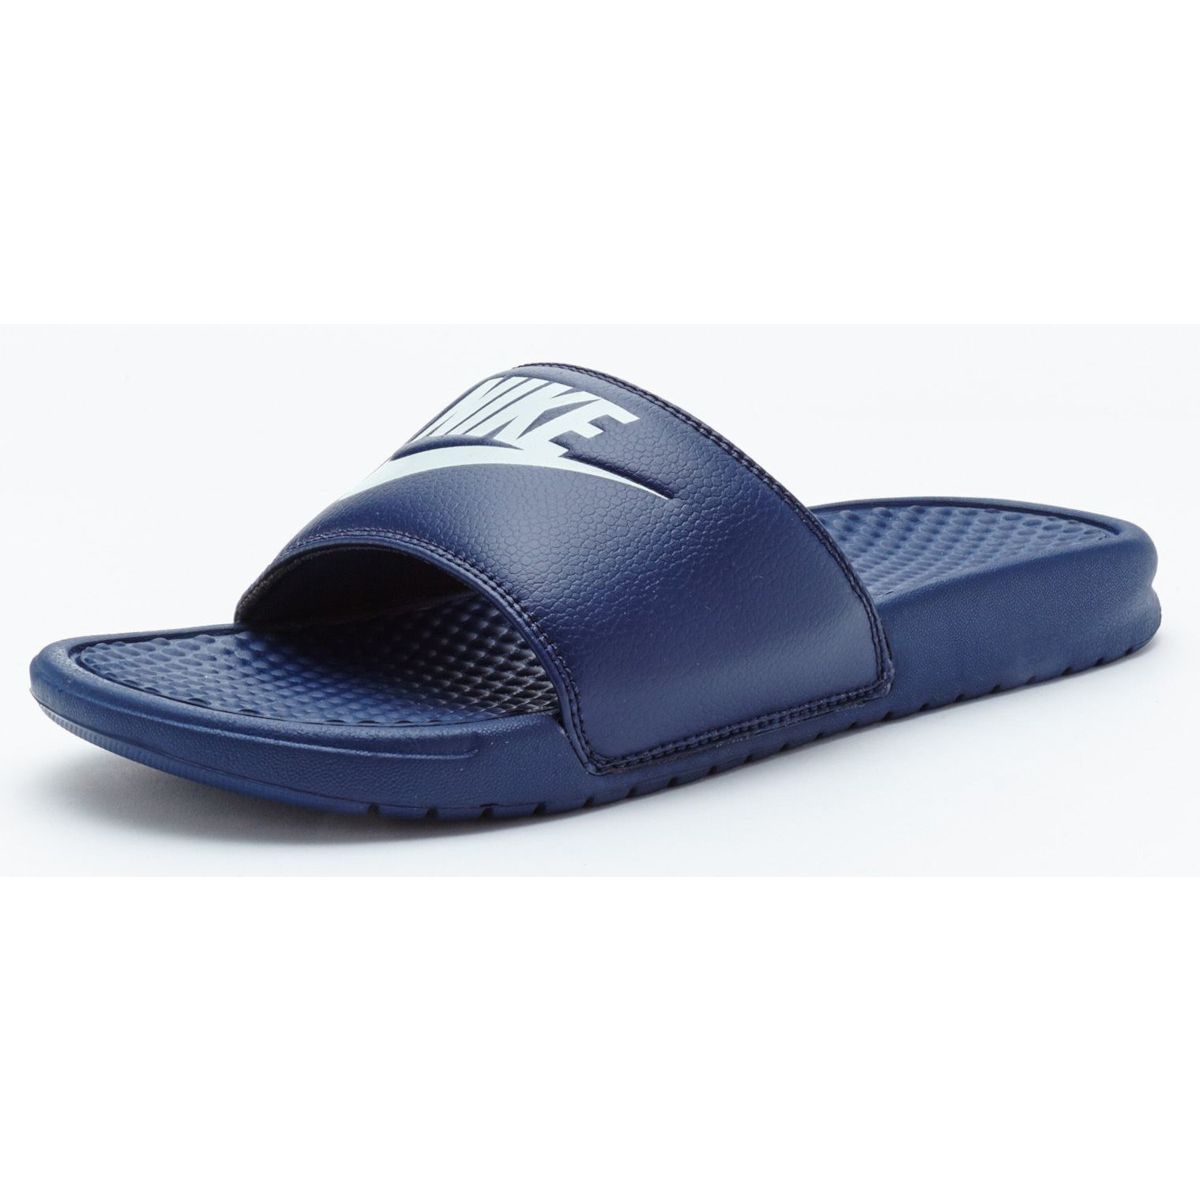 Buy PUMA Synthetic Leather Regular Strap Men's Slippers